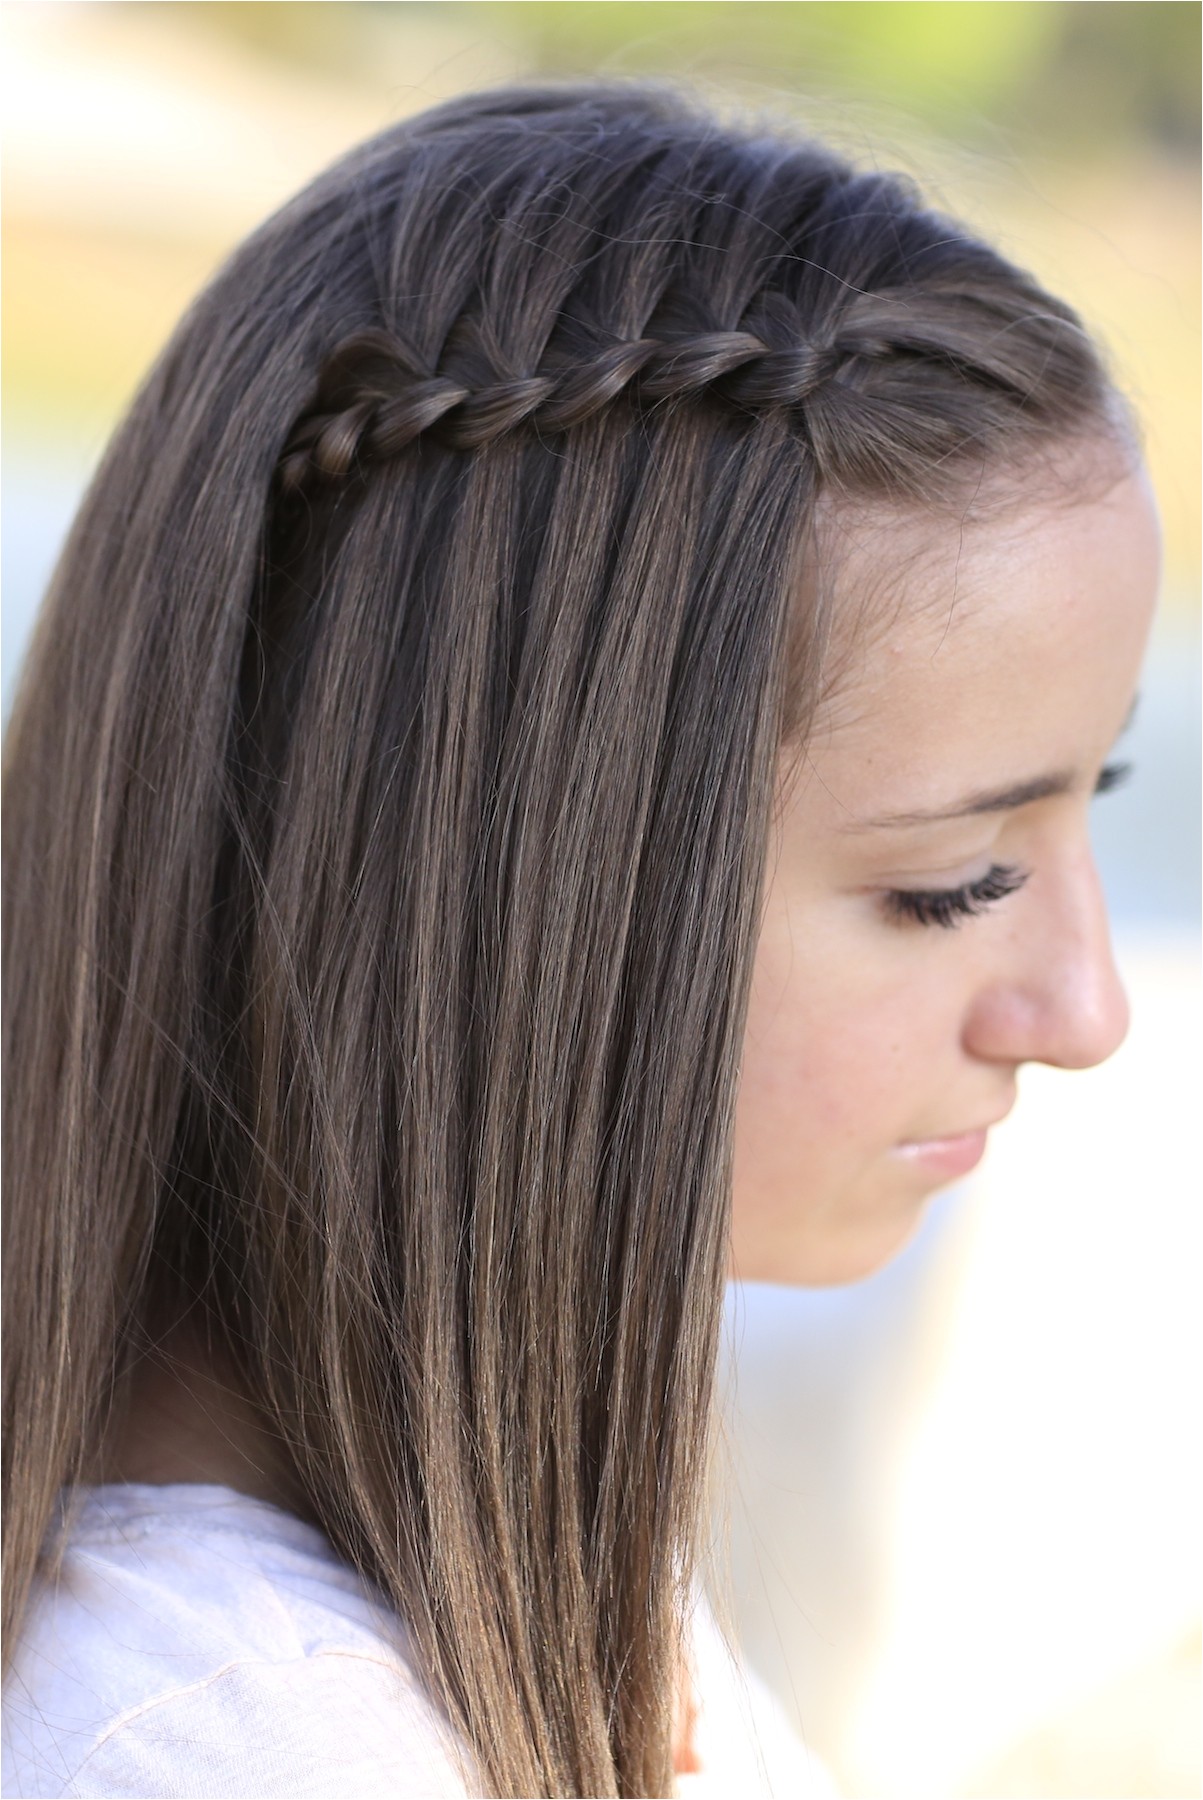 ideas for hairstyles for 12 year old girls